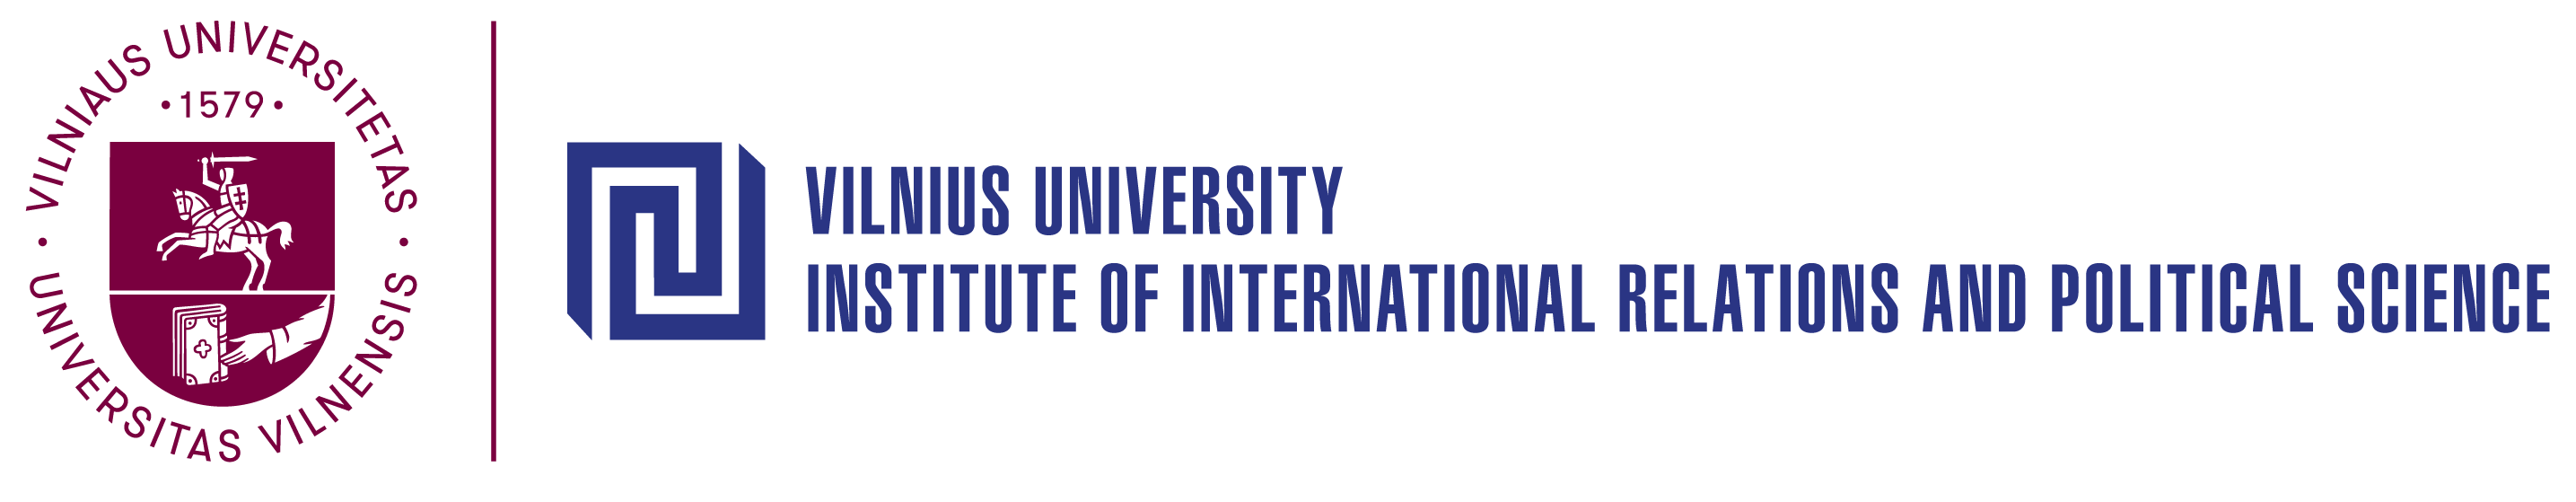 Institute of International Relations and Political Science (VU - IIRPS) logo